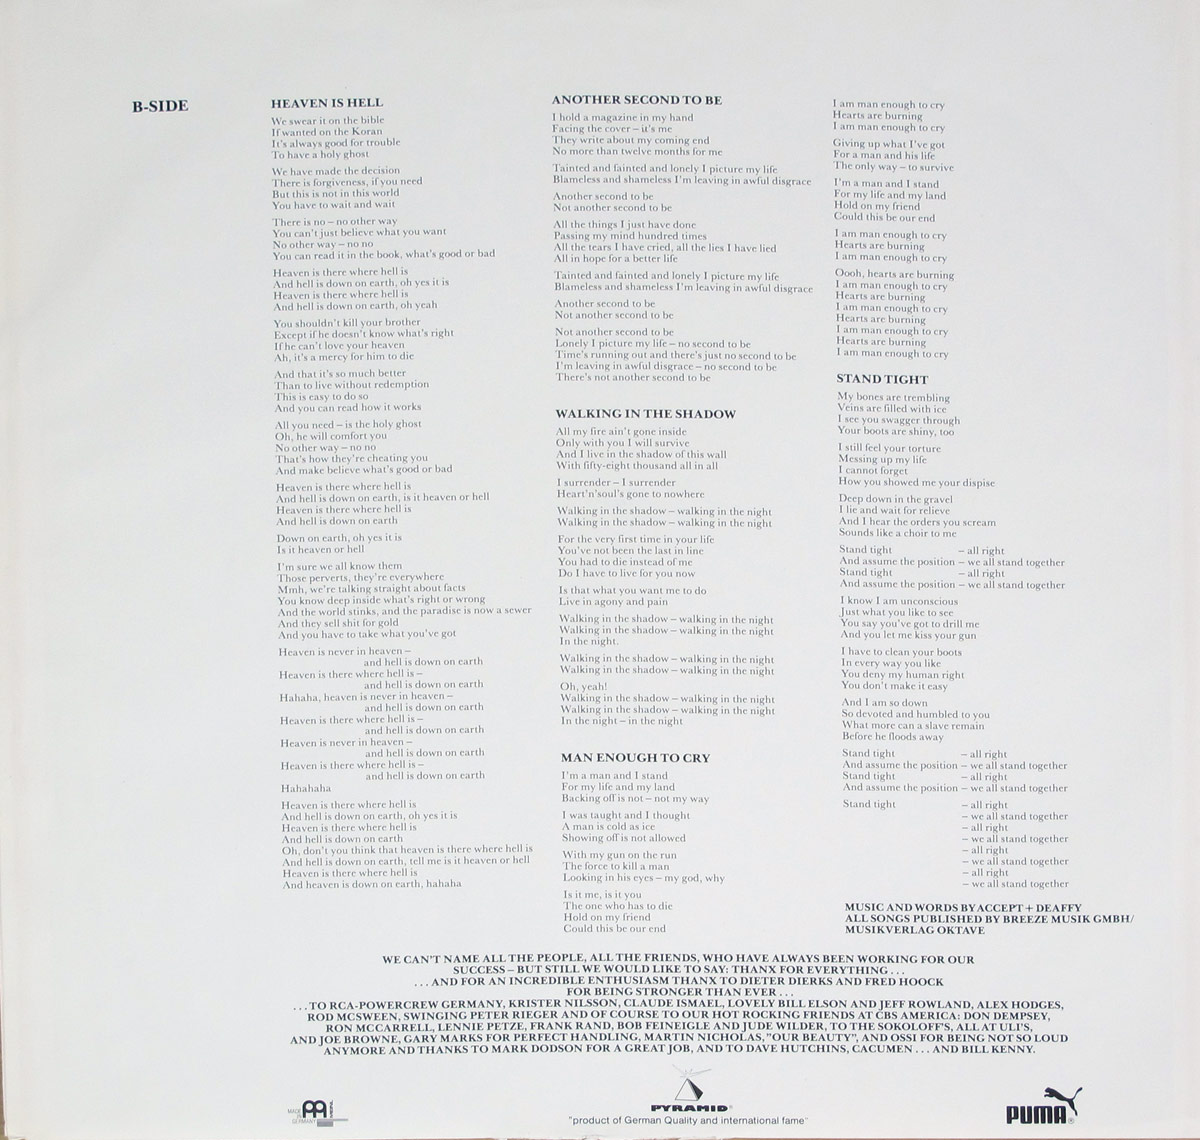 Lyrics custom inner sleeve of Russian Roulette by Accept Side One  